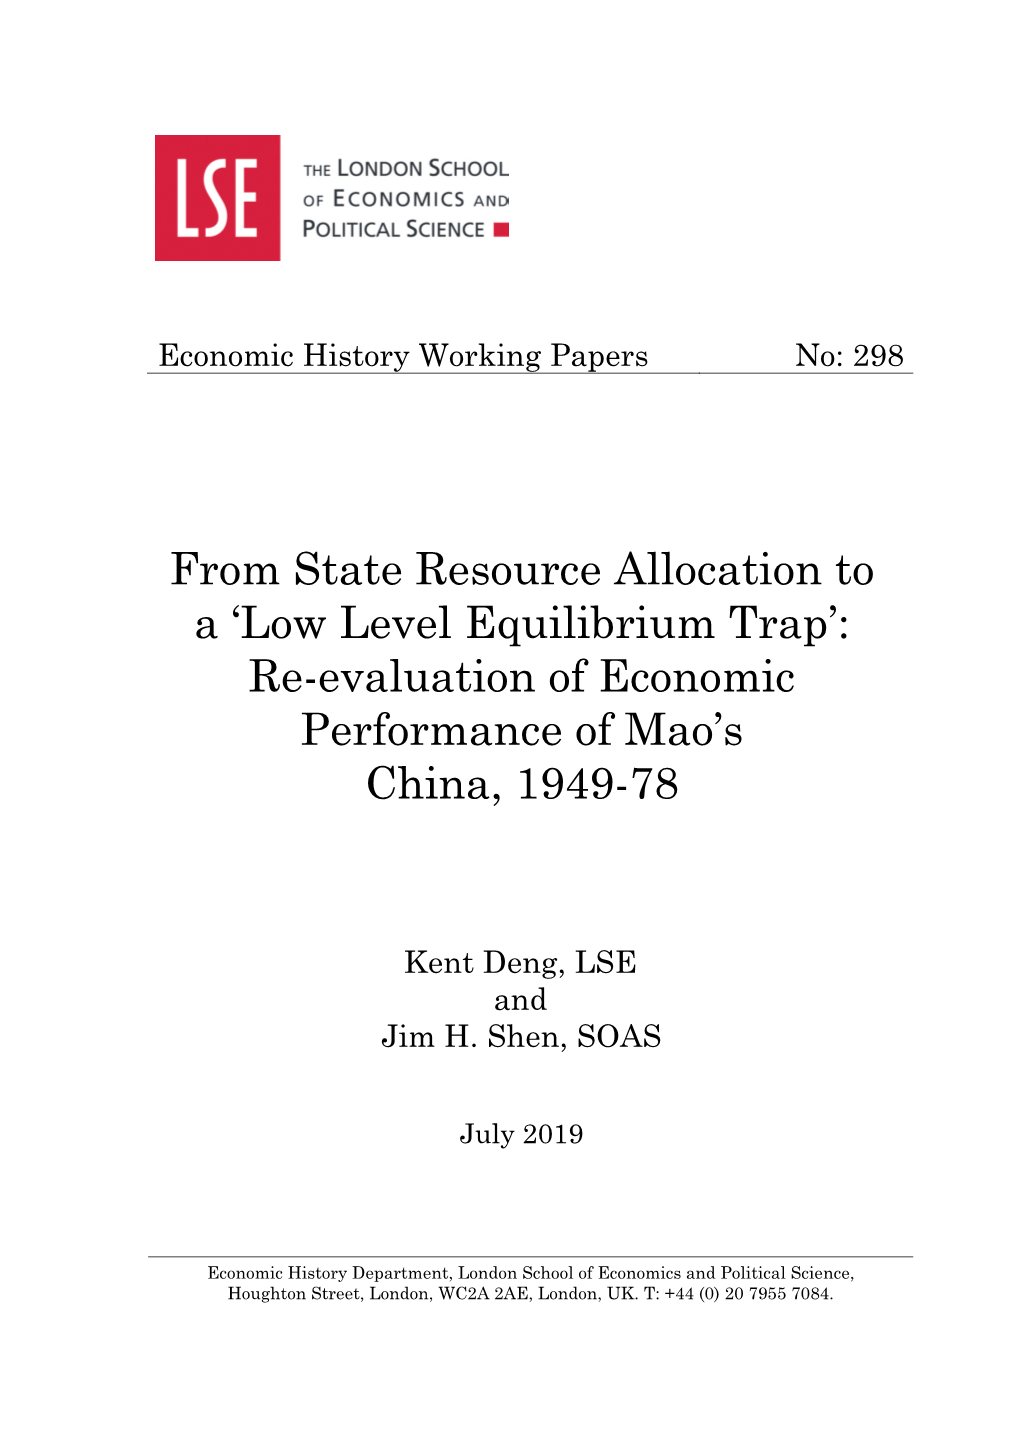 From State Resource Allocation to a 'Low Level Equilibrium Trap': Re-Evaluation of Economic Performance of Mao's China, 1